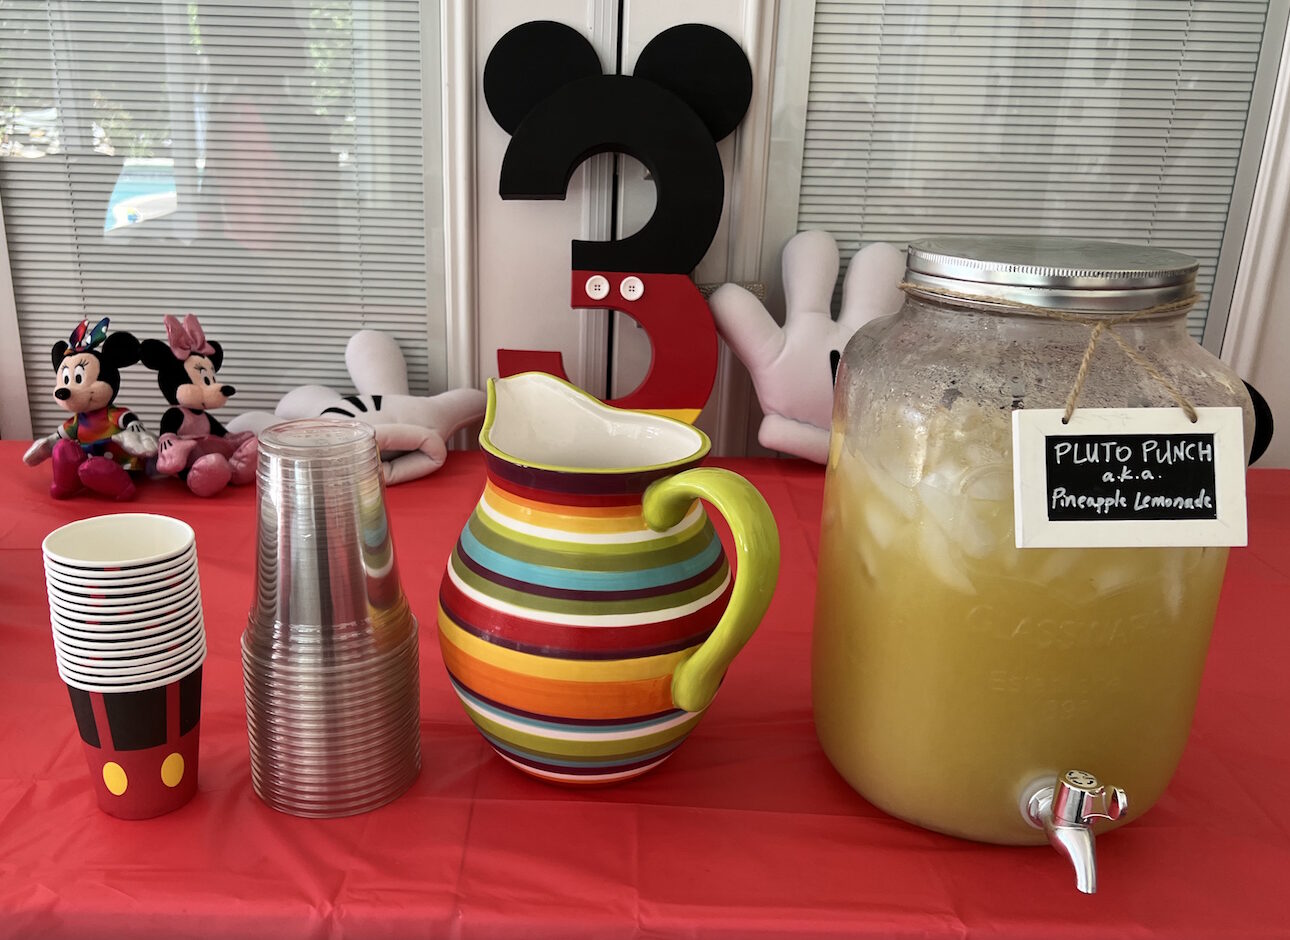 Pluto Punch at Pepper's Magical "Mickey & Minnie Mouse" 3rd Birthday Pool Party | Creative ideas for hosting a magical Mickey & Minnie themed birthday bash for your little Mouseketeer with do-able decor, punny snacks, and party games that are fun for all ages! via thinkingcloset.com